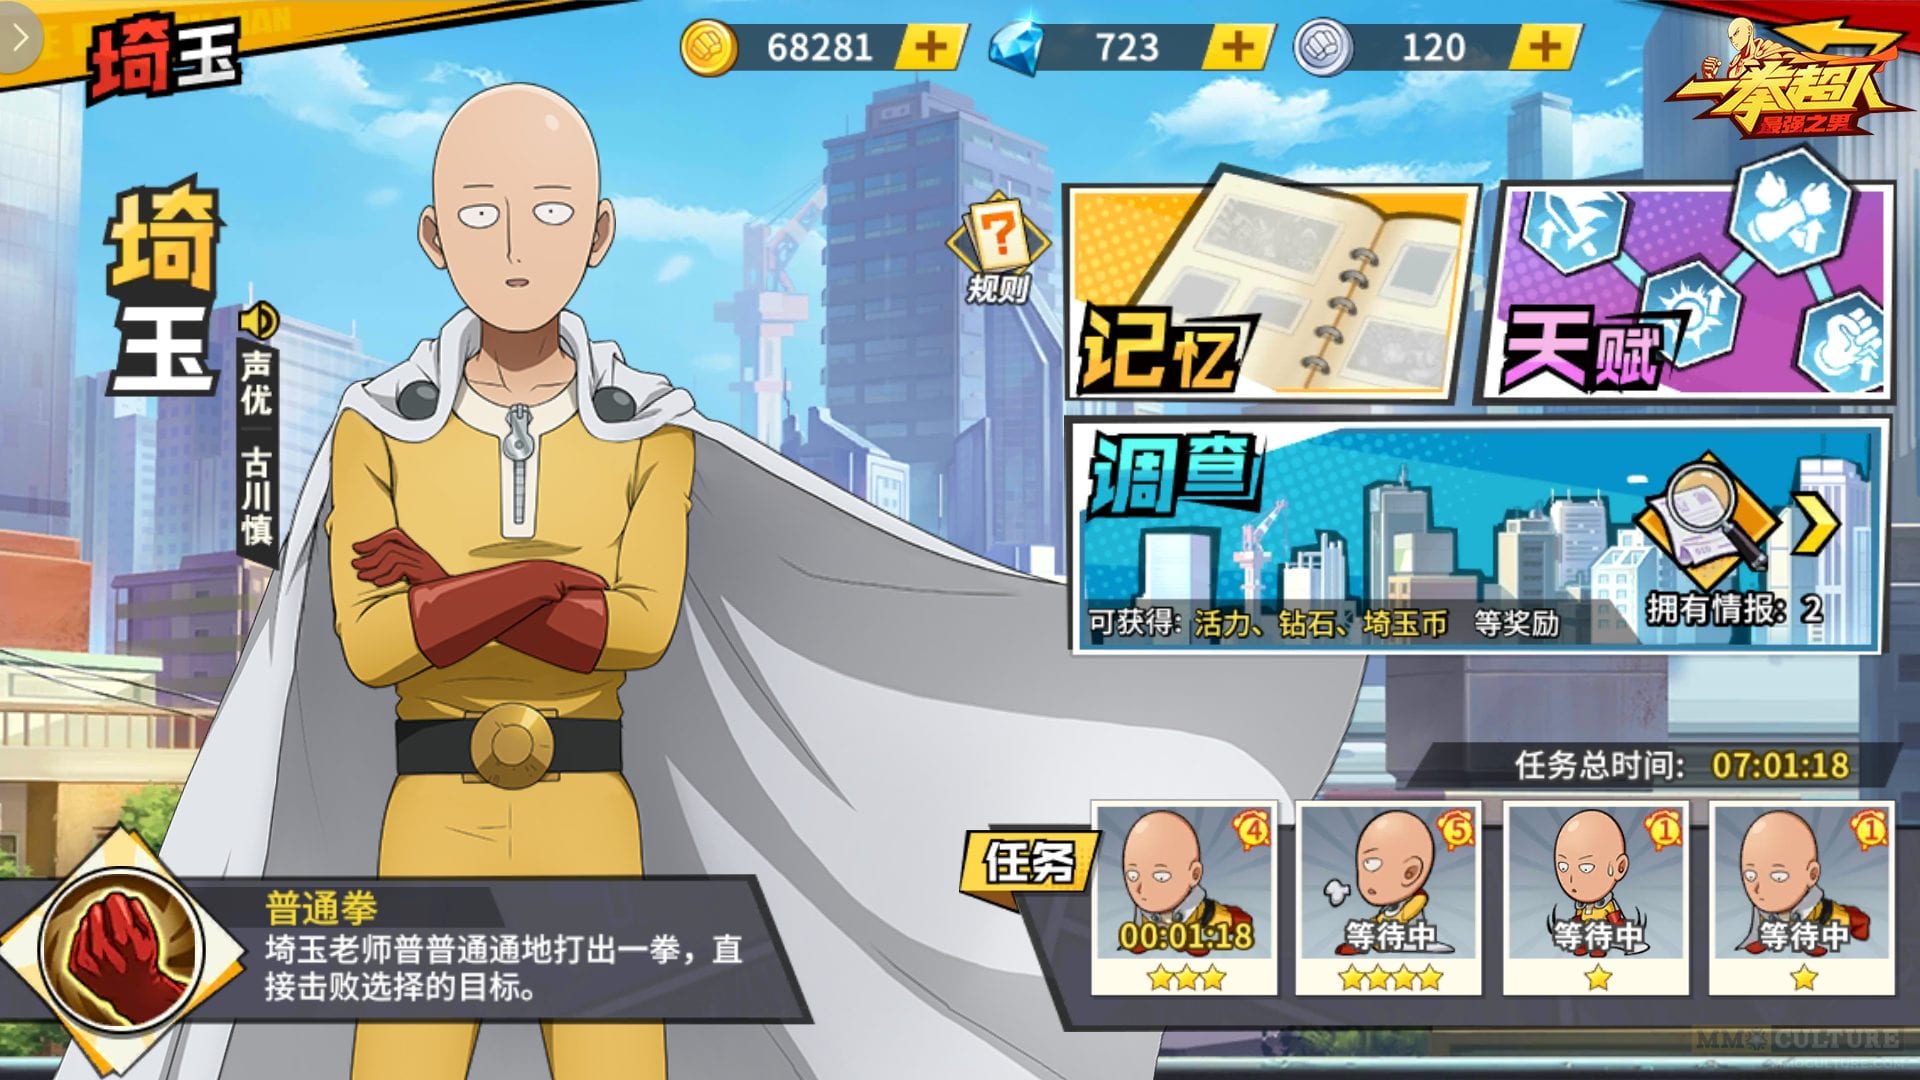 🔥The best card mobile game - One Punch Man: The Strongest